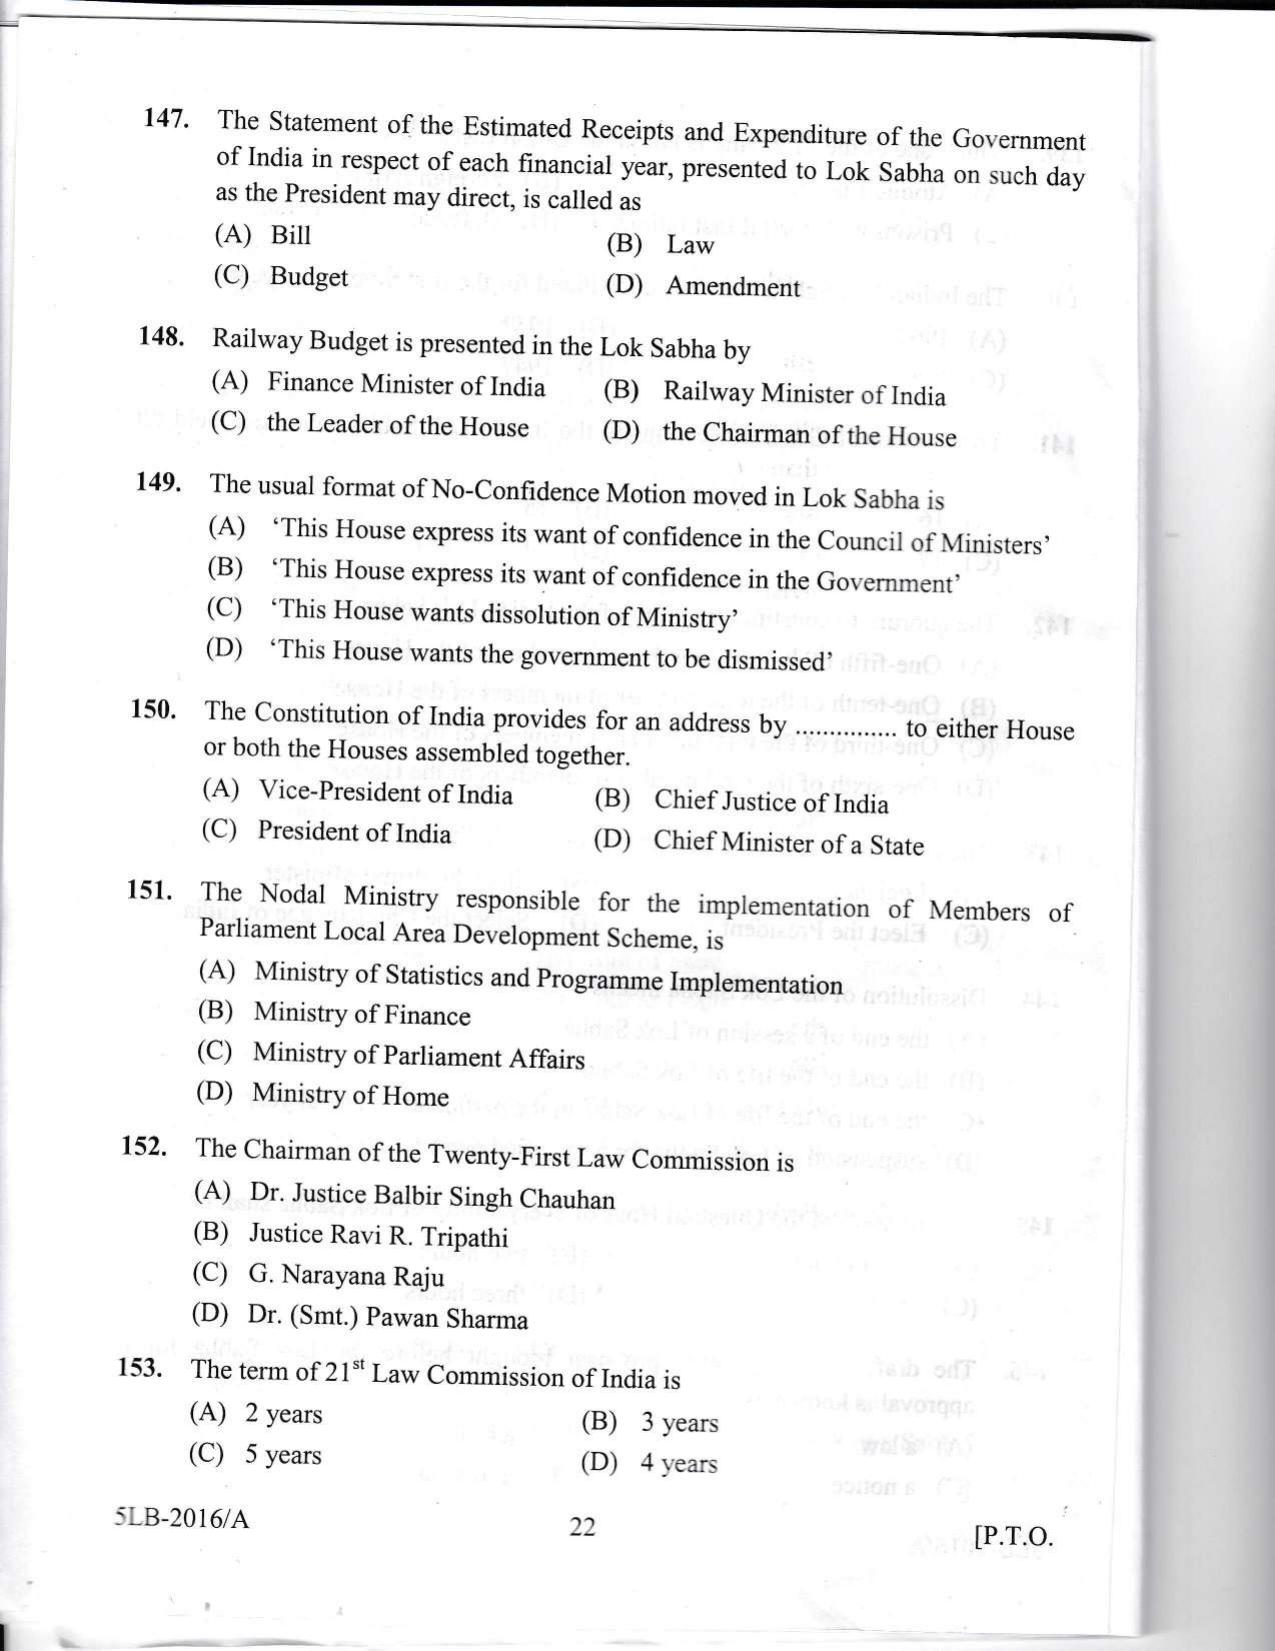 KLEE 5 Year LLB Exam 2016 Question Paper - Page 22